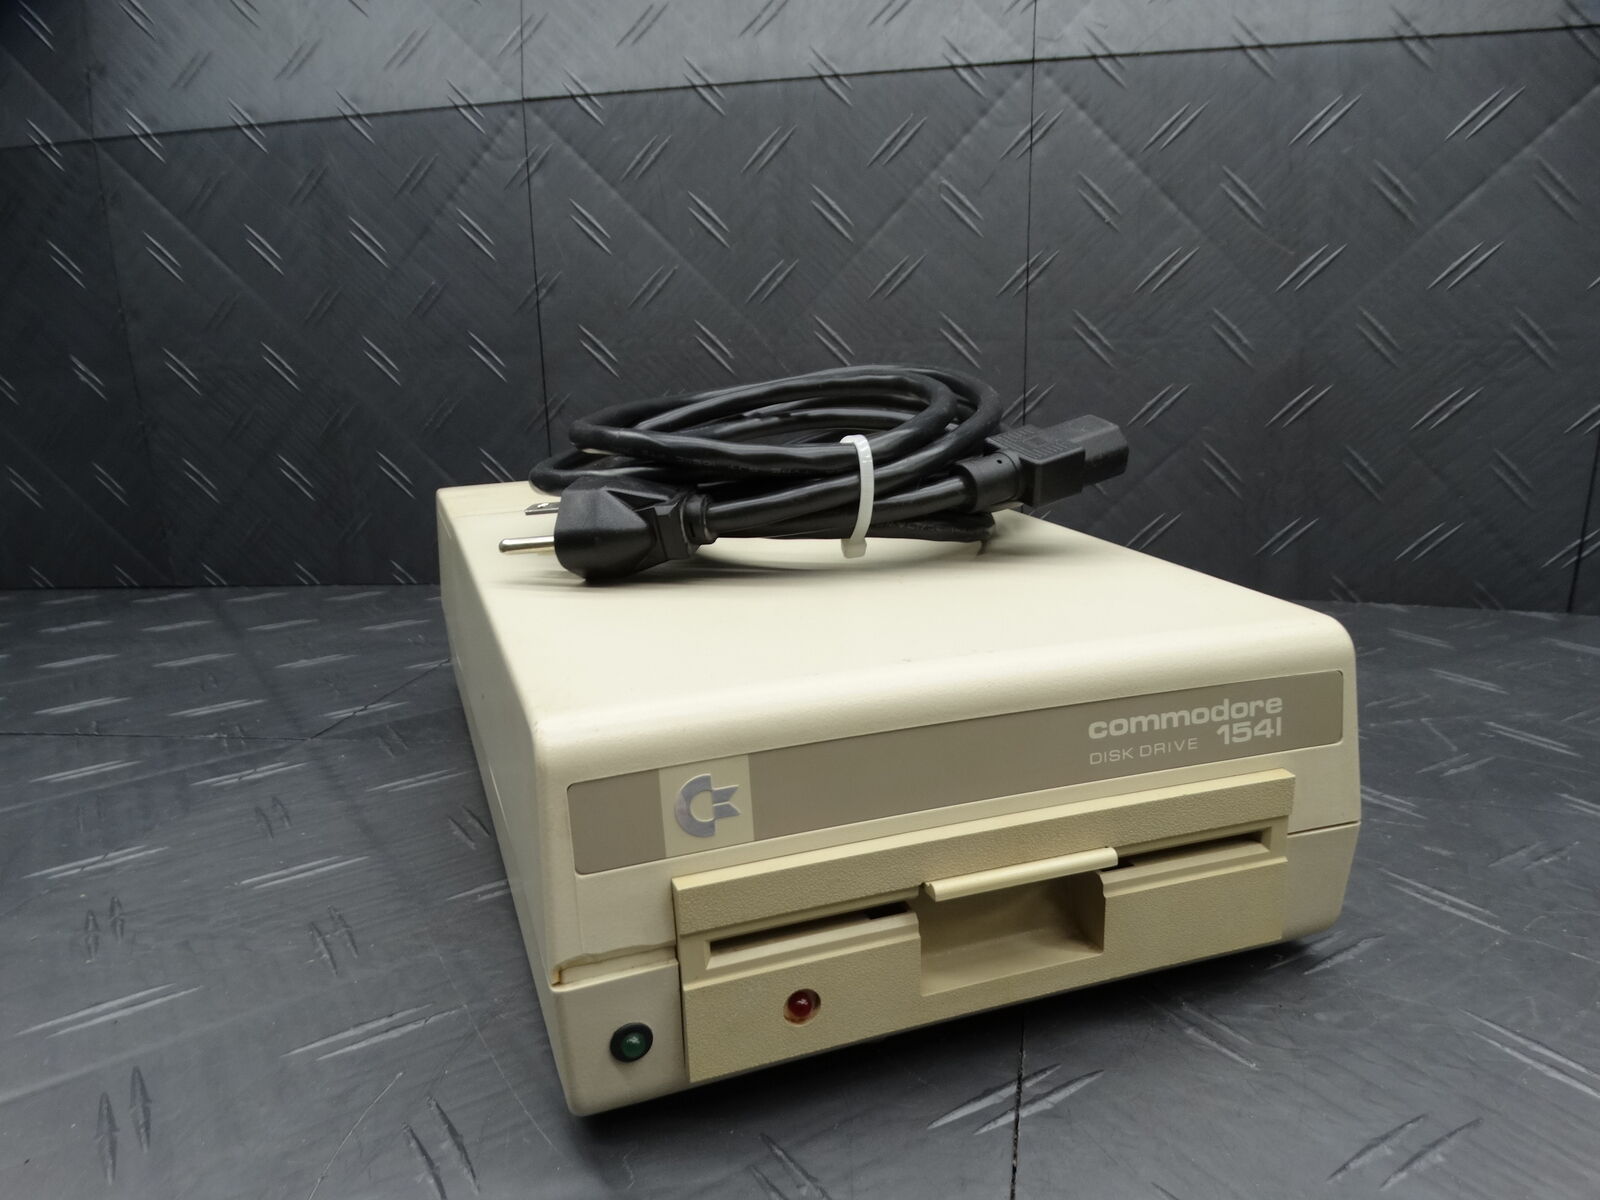 Commodore 1541 Floppy Disk Drive w/ Power Supply